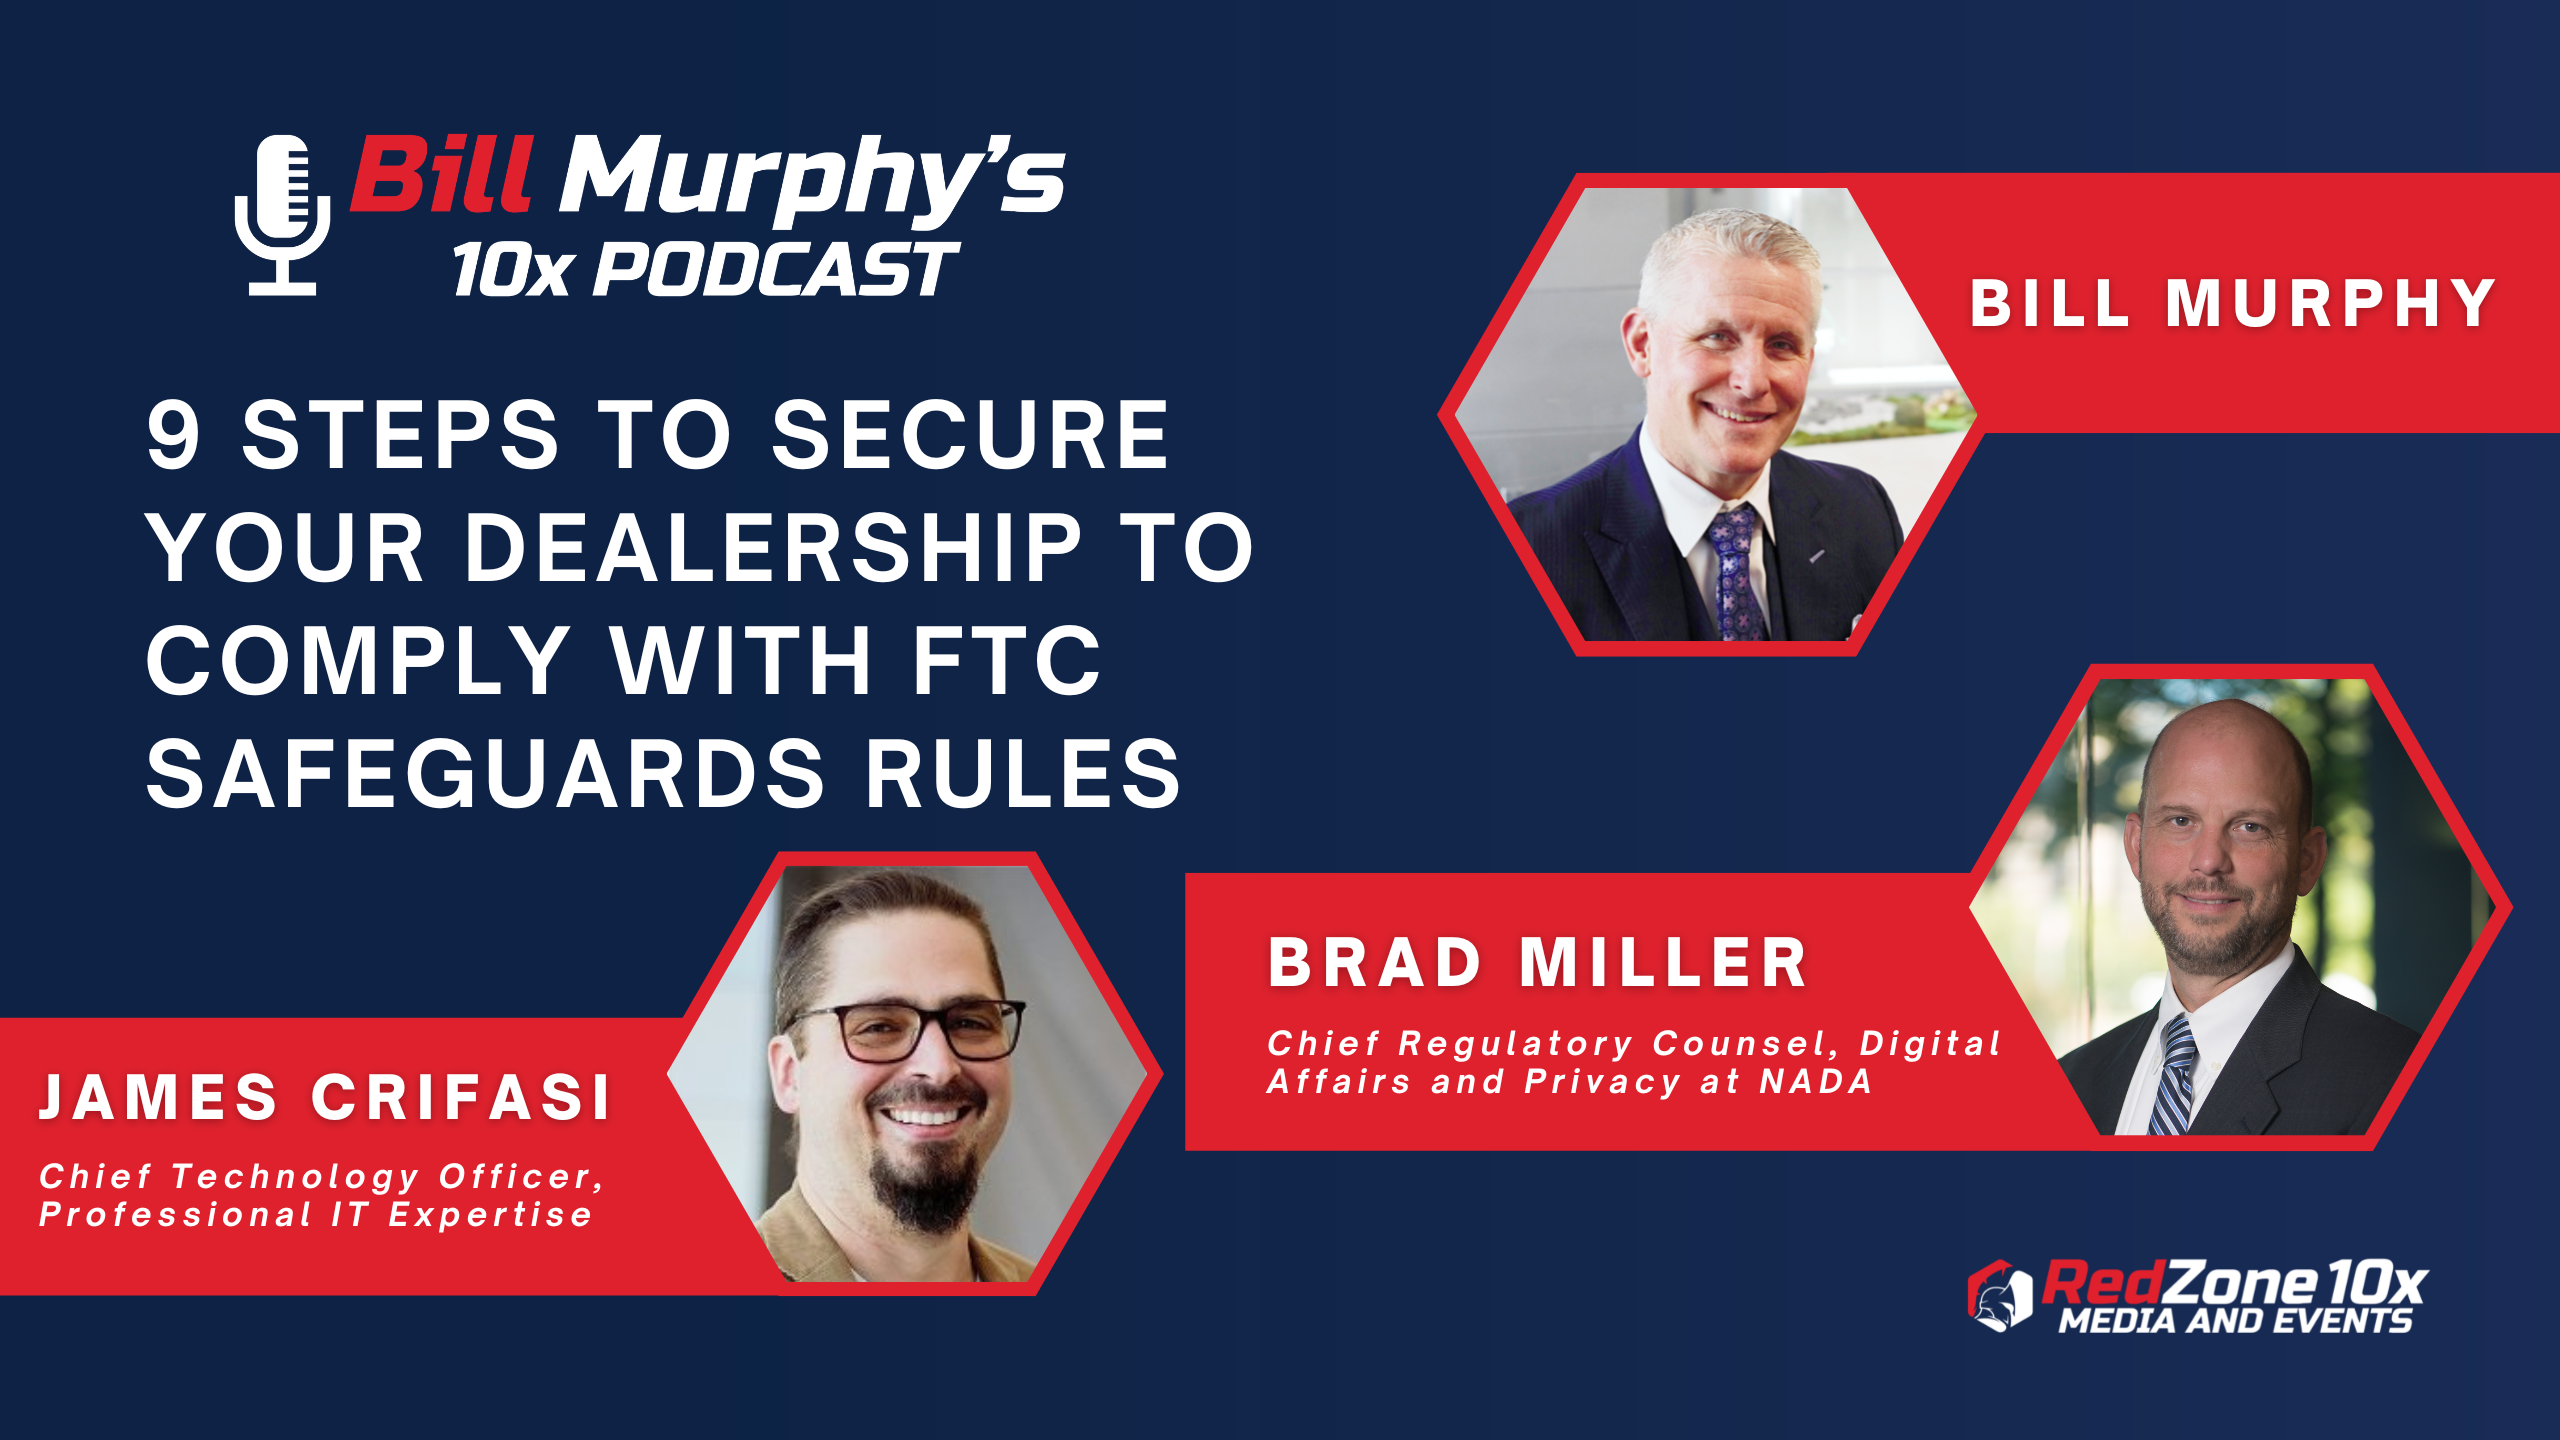 9 Steps to Secure Your Dealership to Comply with FTC Safeguards Rules with Brad Miller, Chief Regulatory Counsel for Digital Affairs and Privacy at NADA, and James Crifasi, CTOat RedZone Technologies.